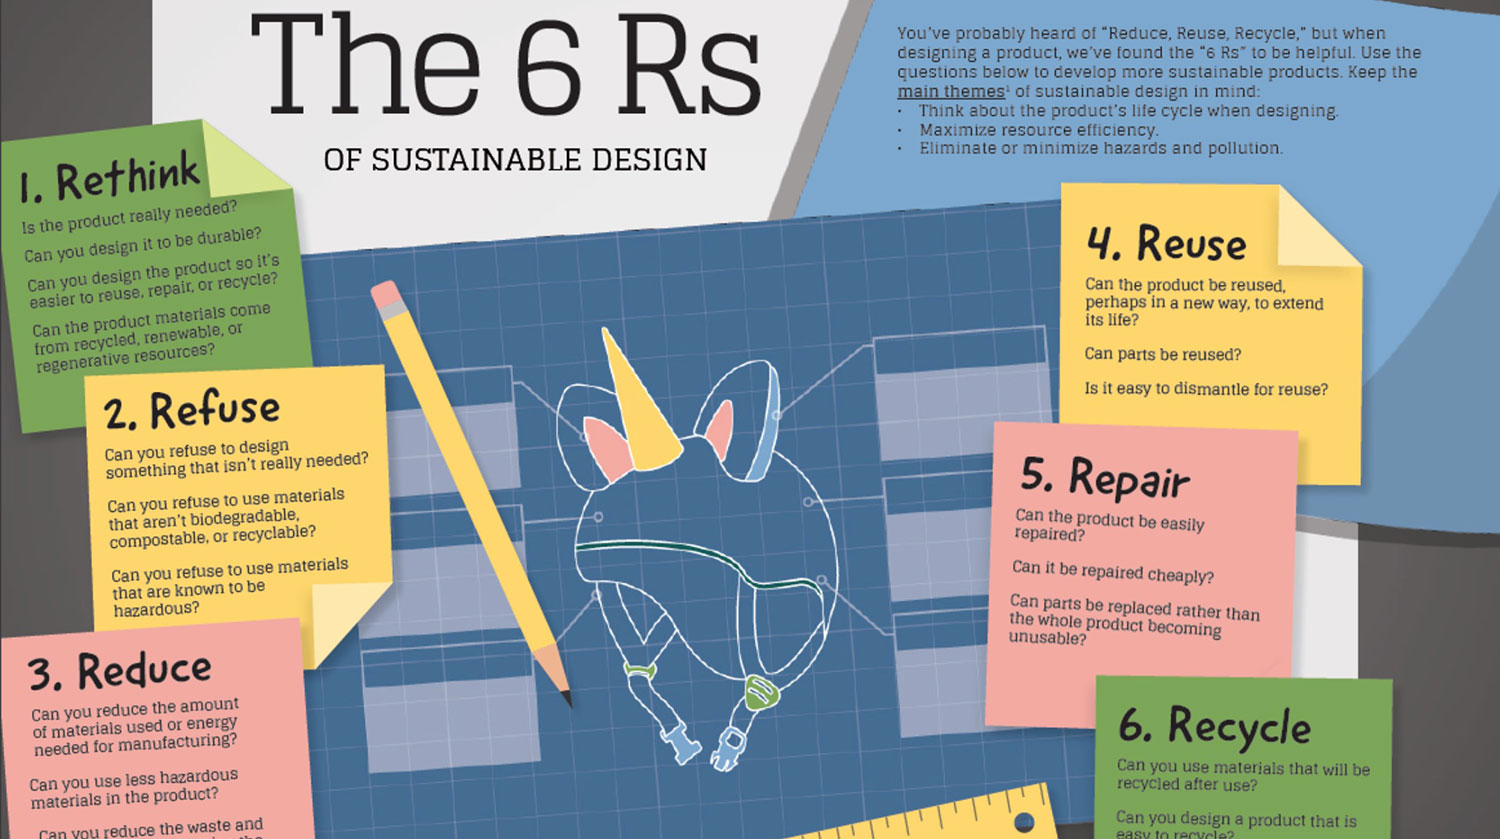 6Rs of Sustainable Design Poster available through the Washington Department of Ecology